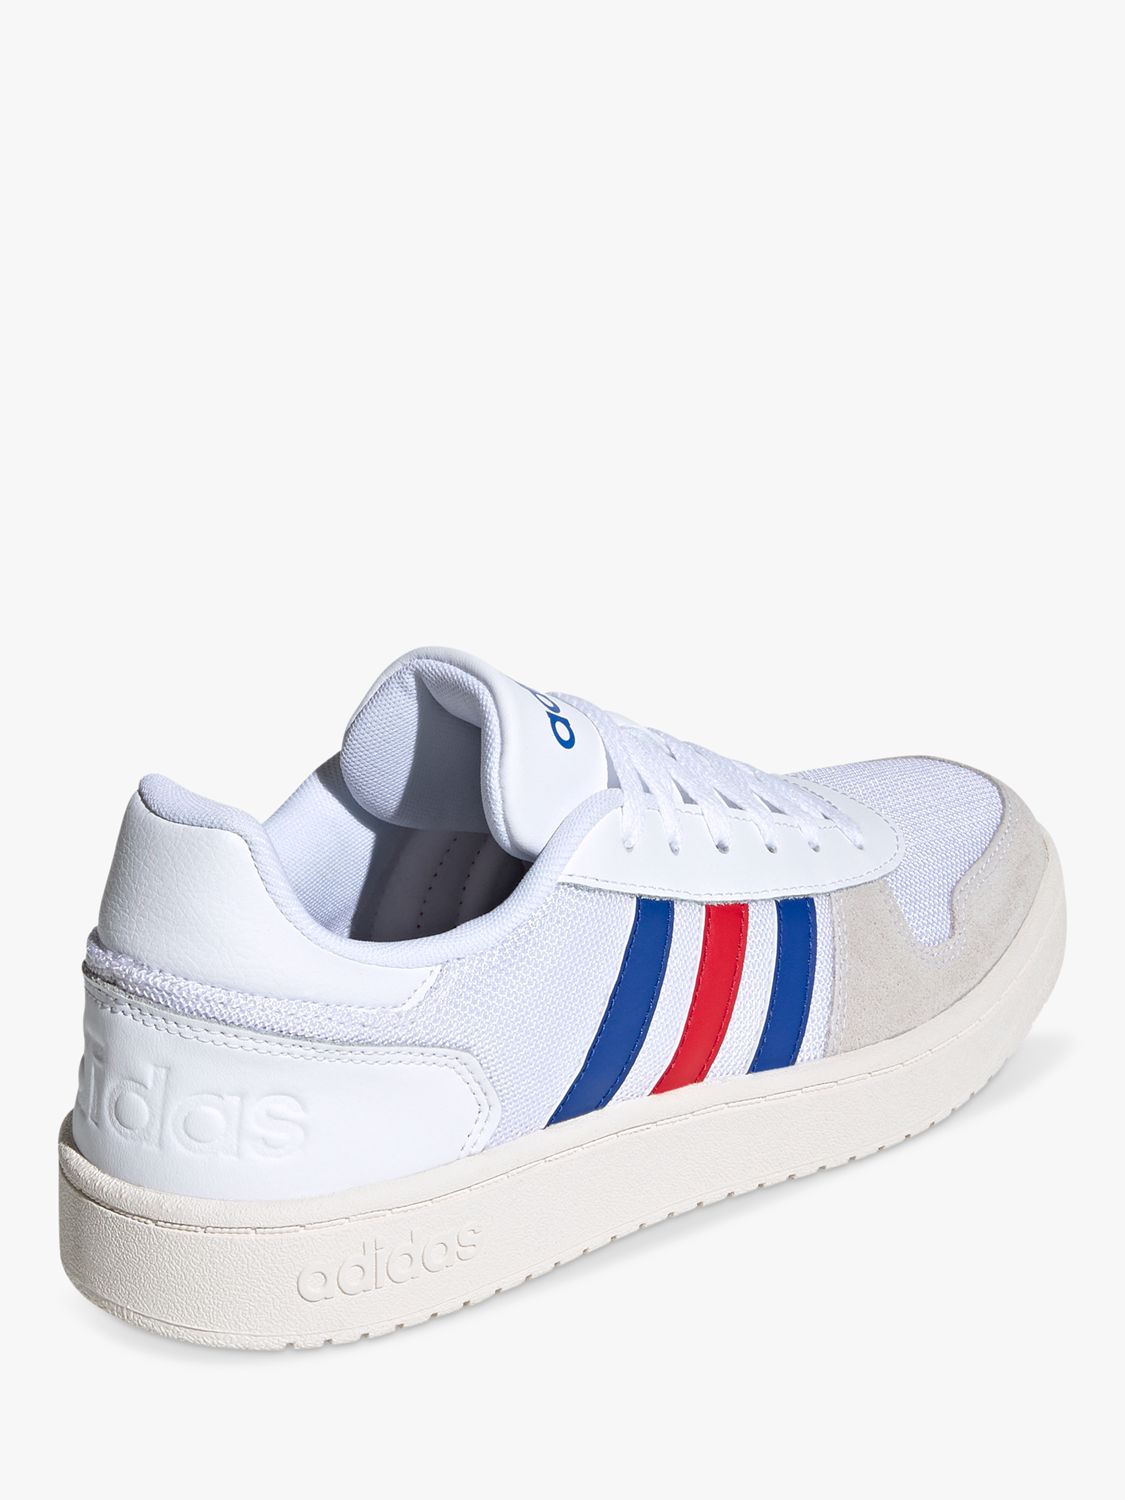 adidas Hoops 2.0 Leather Lace Up Trainers, White/Scarlet/Royal Blue at ...